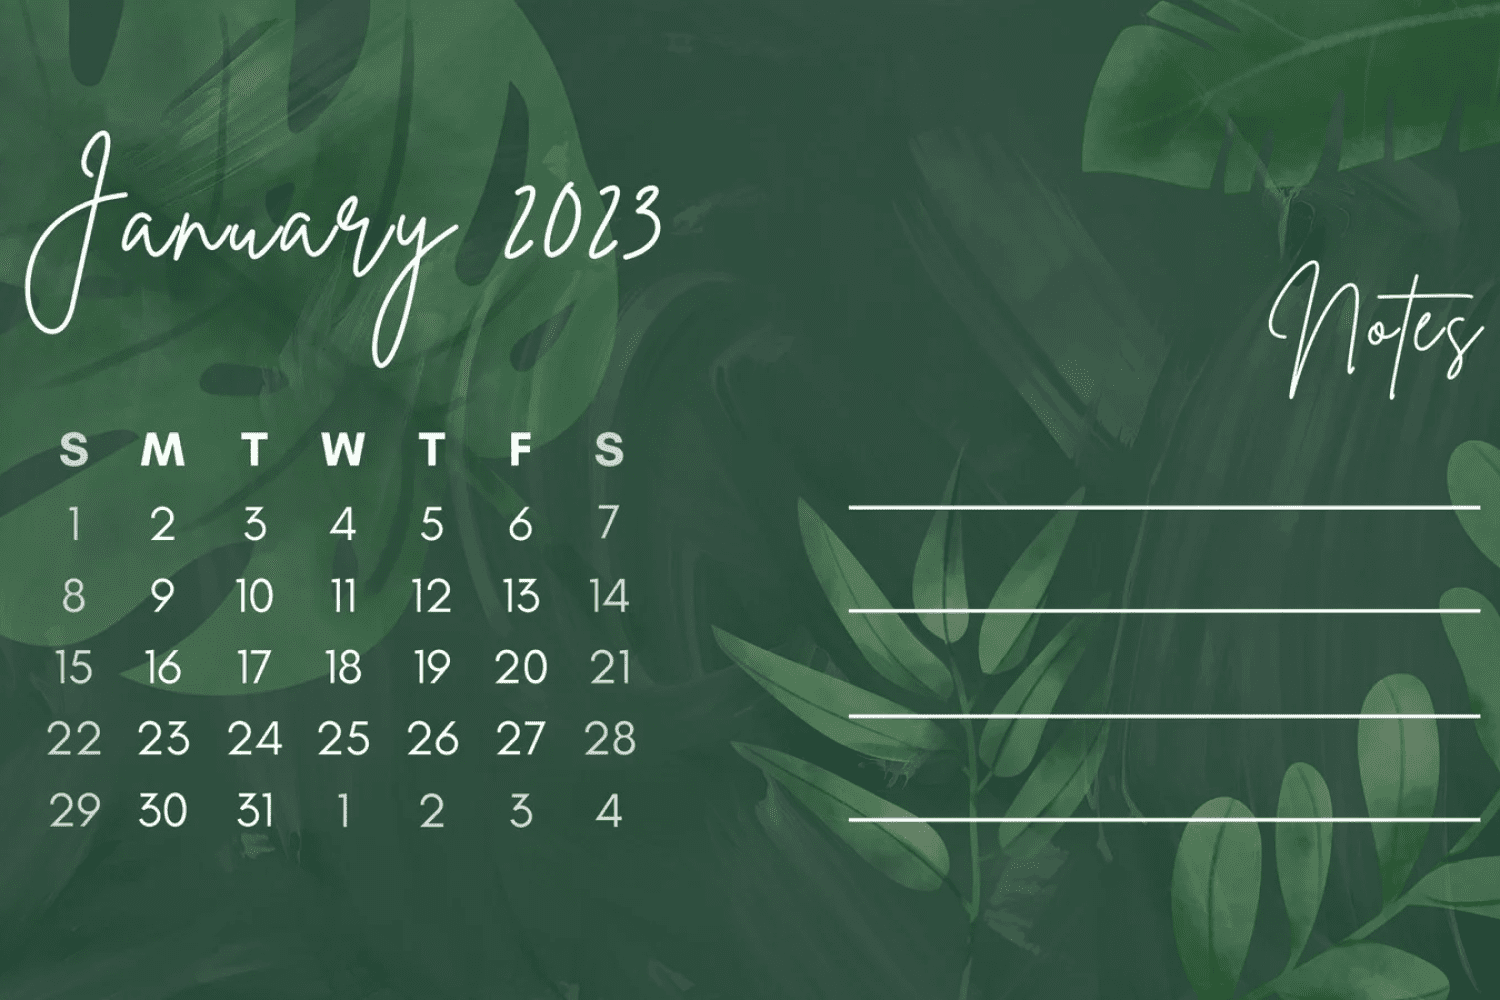 Calendar with green and white color palette and a separate column for your notes.